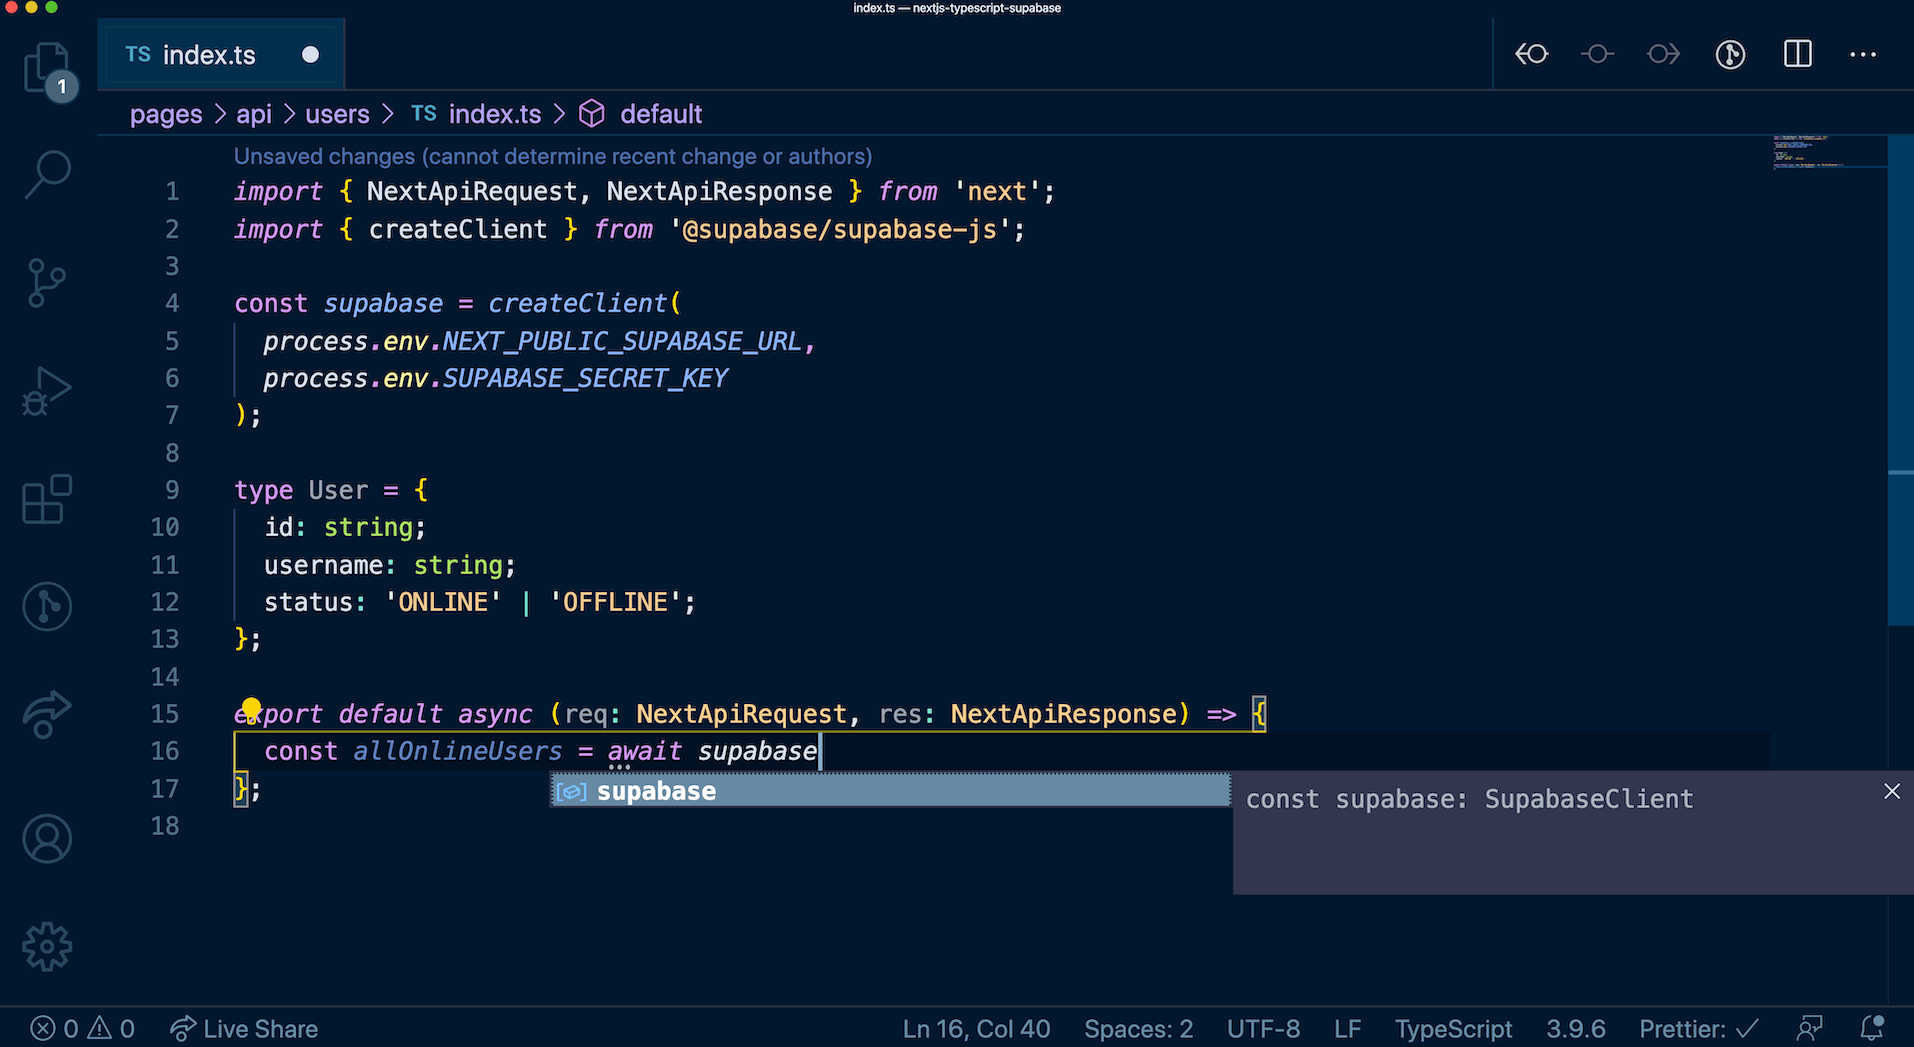 This git shows how TypeScript makes it even easier to use Supabase, through VSCode's intellisense.